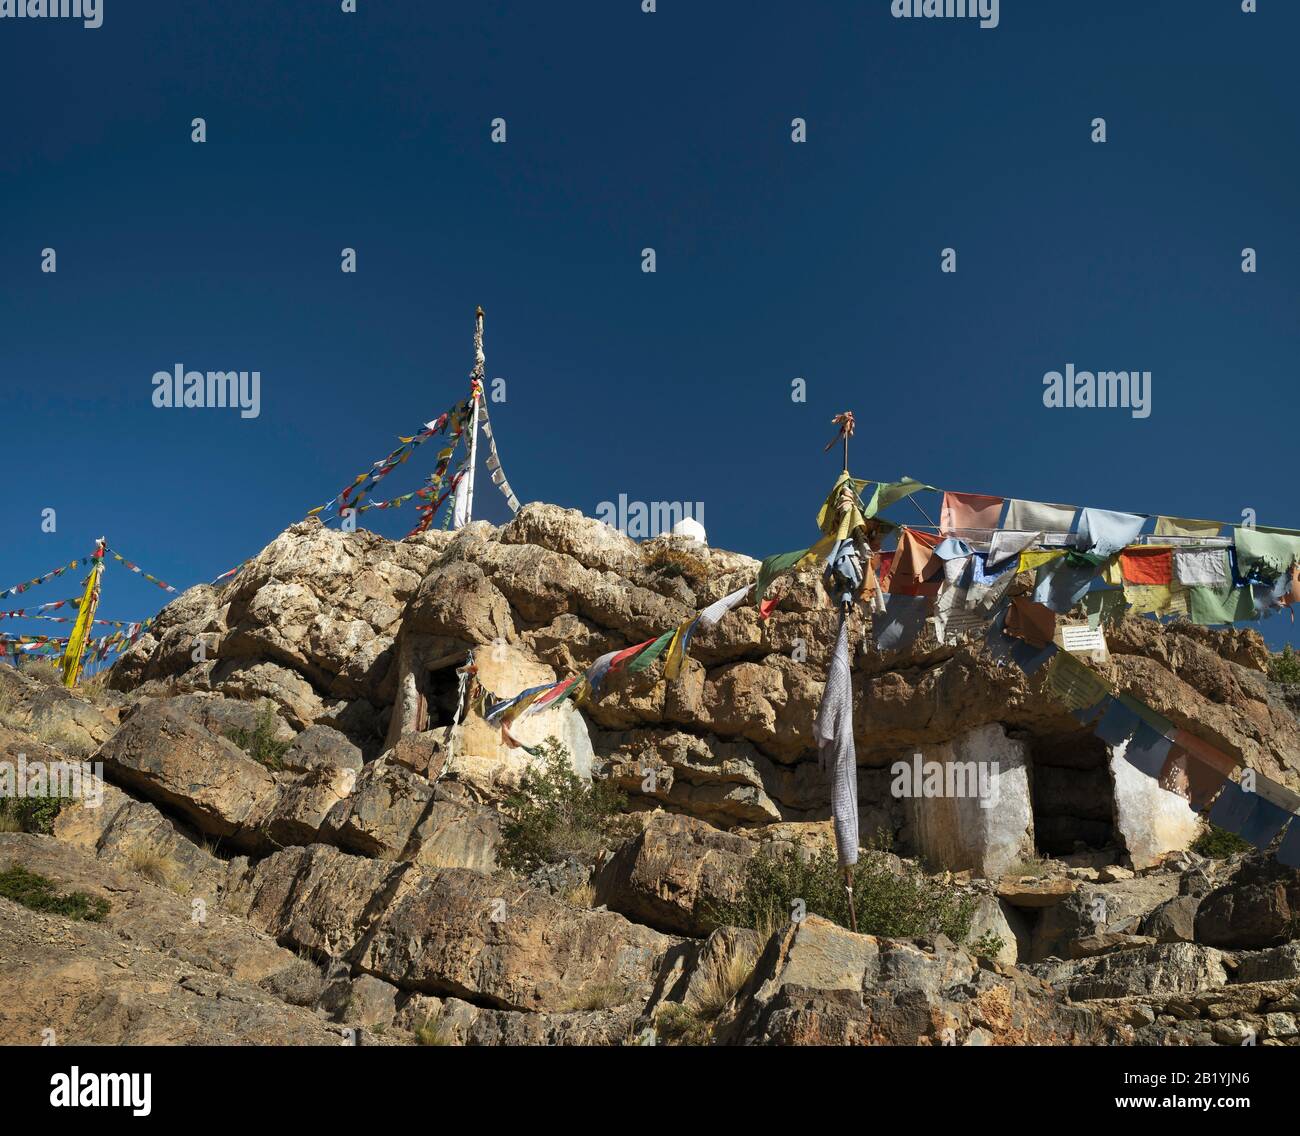 Rocky retreat for Buddhist monks with prayer flags high up in the Himalayas under blue sky near Kaza, Himachal Pradesh, India. Stock Photo